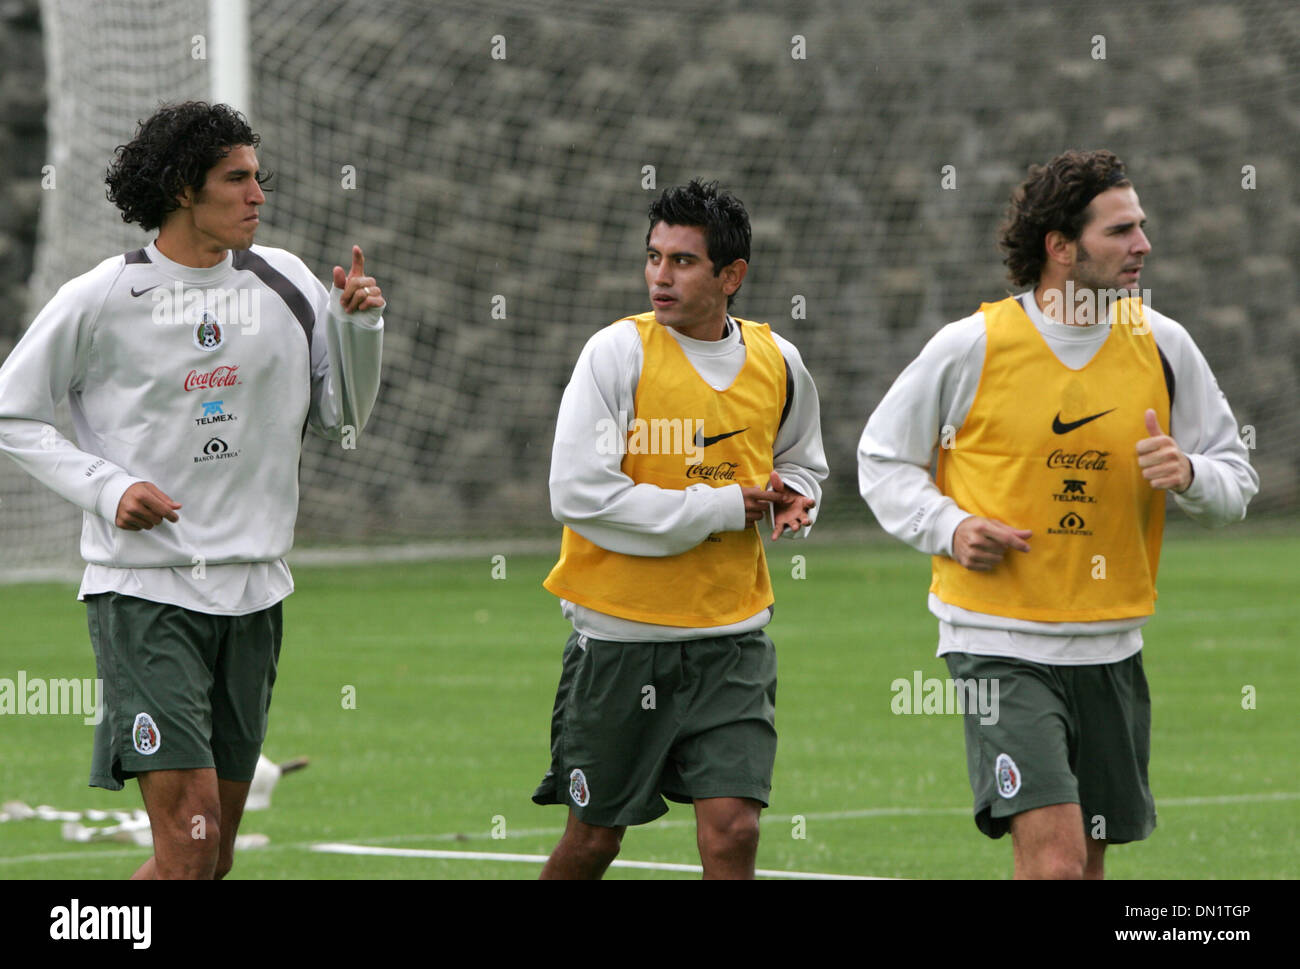 Mar 27, 2006; Mexico City, MEXICO; SOCCER: Mexico soccer team players Francisco Javier Rodriguez (L), Mario Mendez  and Duilio Davino train during a training session at the Centro Pegaso training center. Mandatory Credit: Photo by Javier Rodriguez/ZUMA Press. (©) Copyright 2006 by Javier Rodriguez Stock Photo